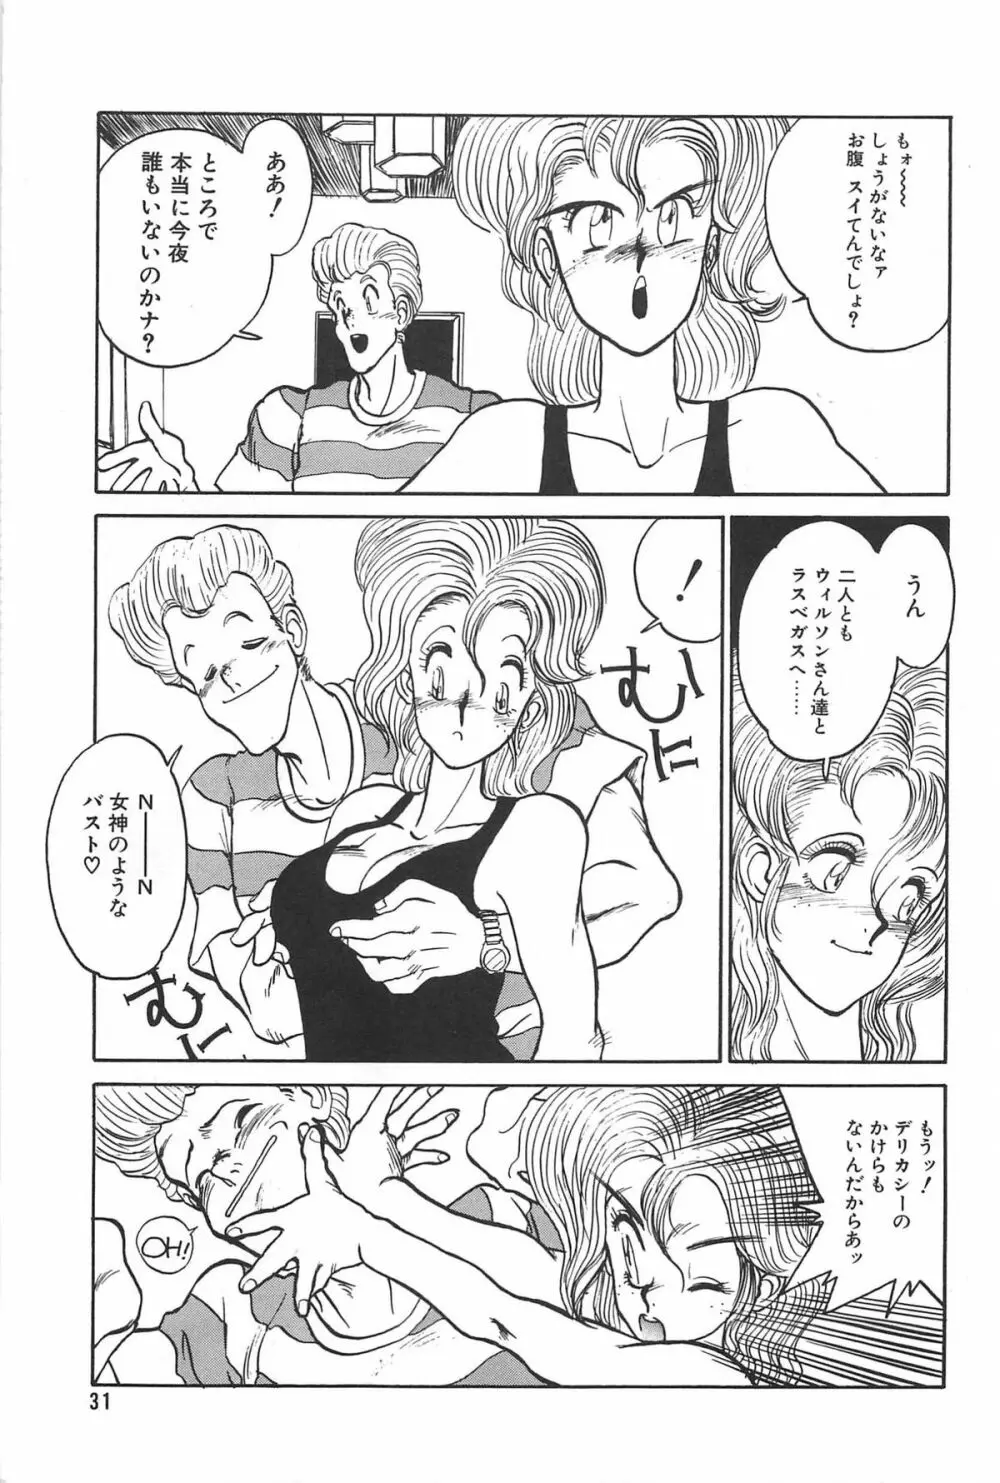 LOVE ME 1995 Page.33